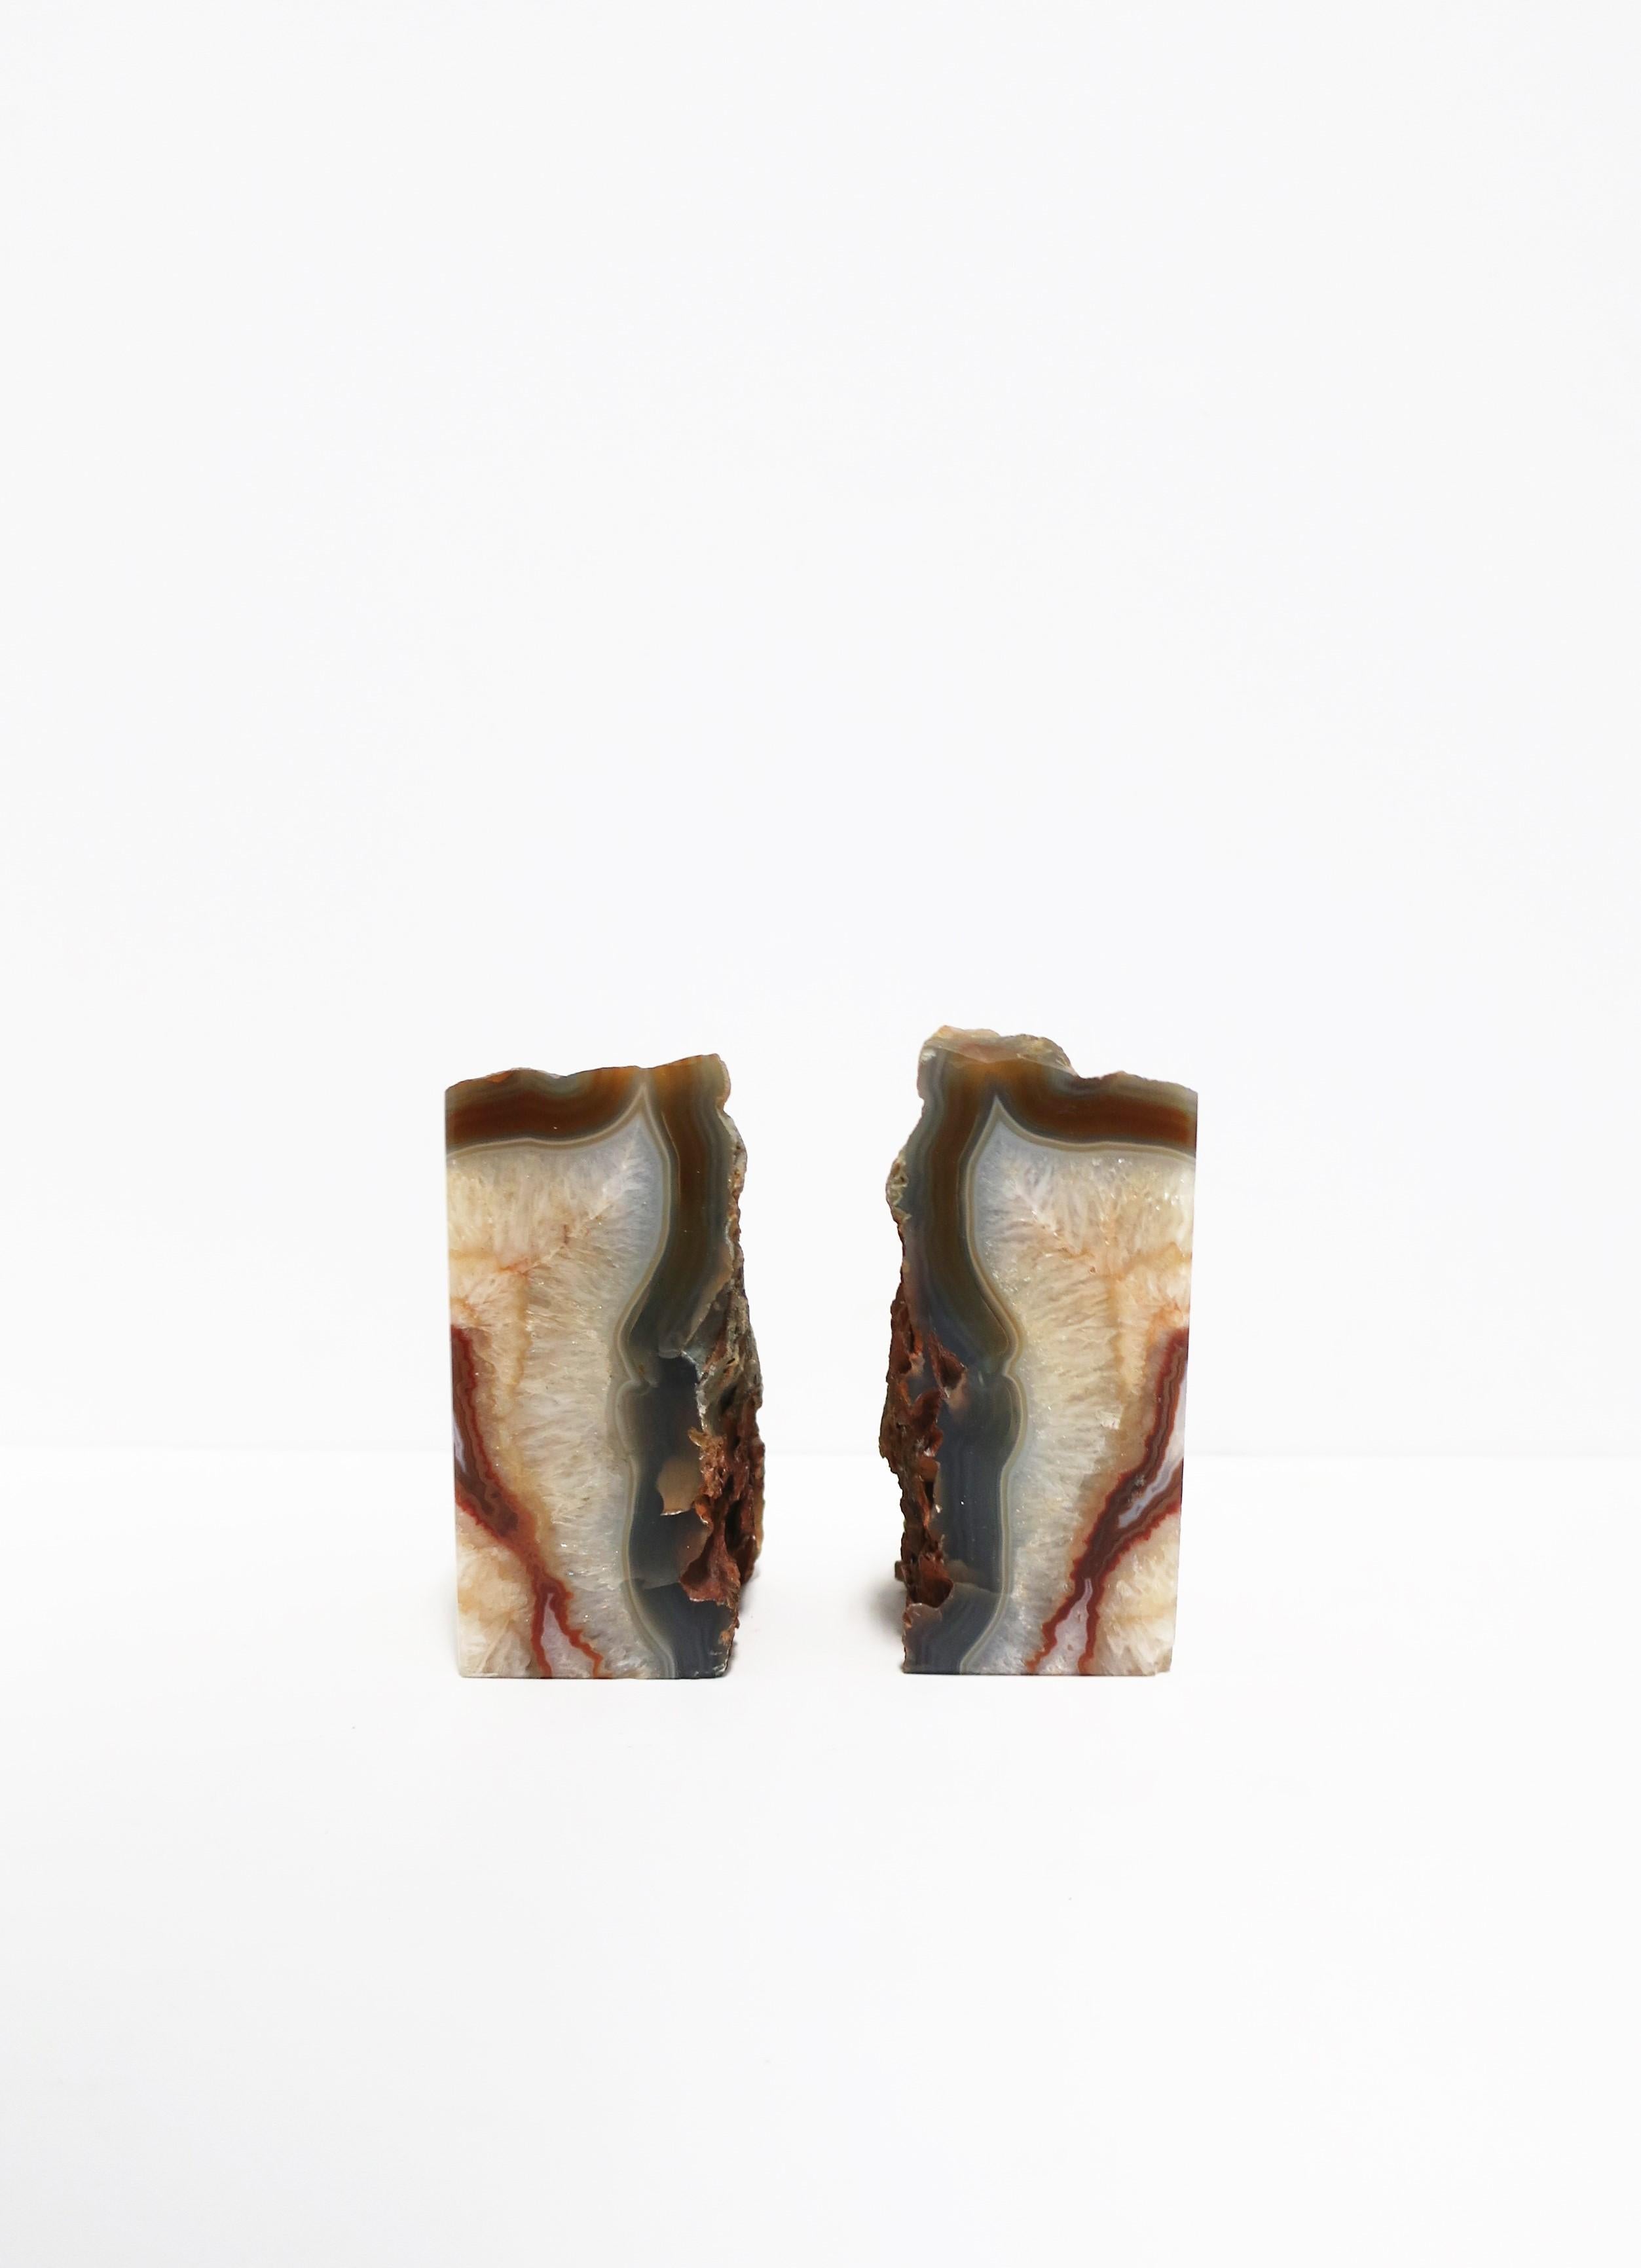 Onyx Agate Bookends or Decorative Objects, Pair 5